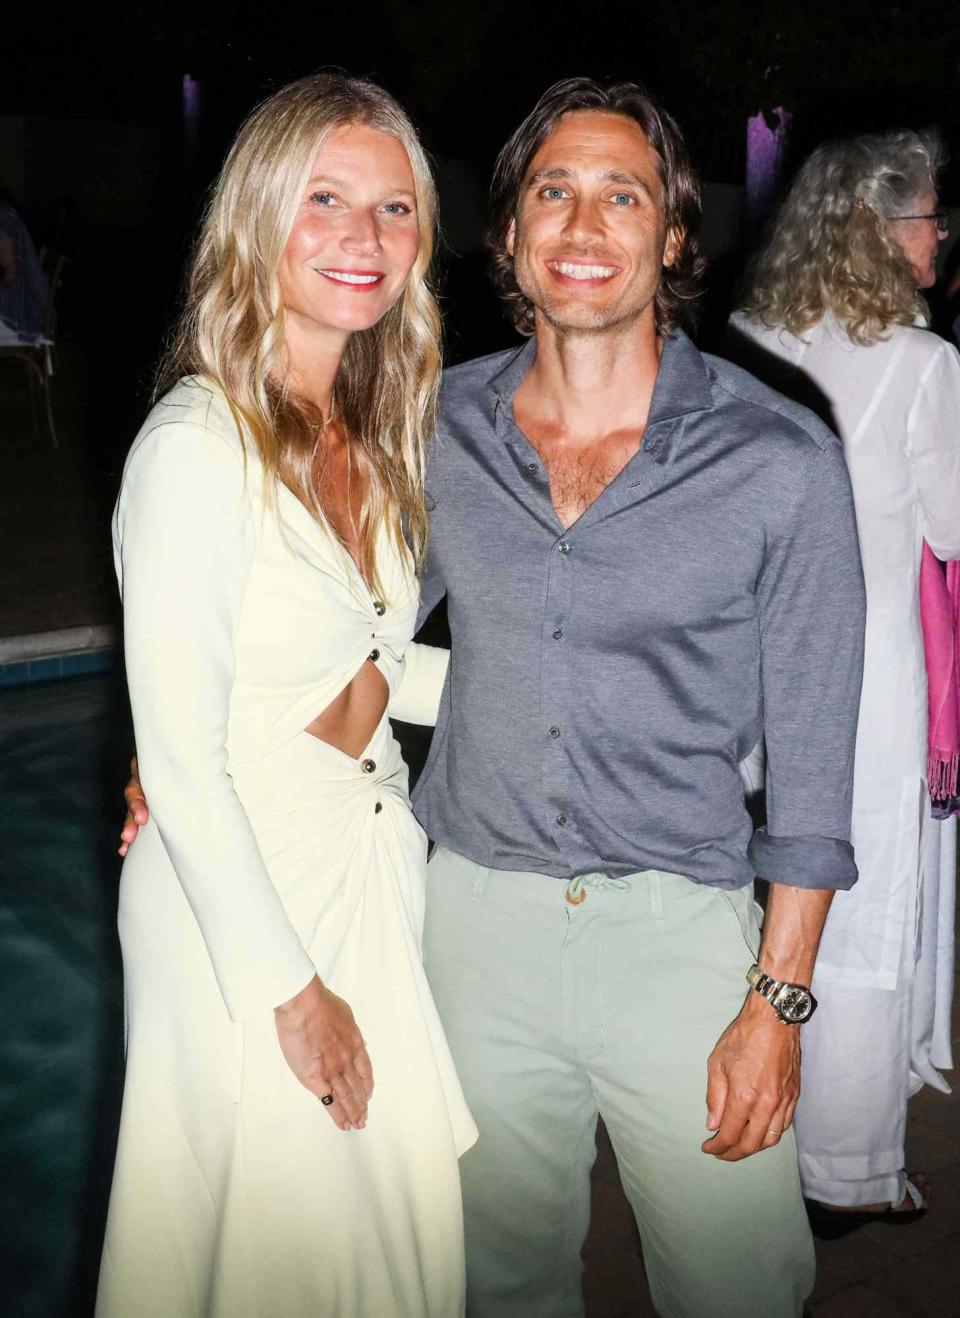 Gwyneth Paltrow and Brad Falchuk attend a promotional party for Netflix's "The Politician" at a private home on August 2, 2019 in East Hampton, New York